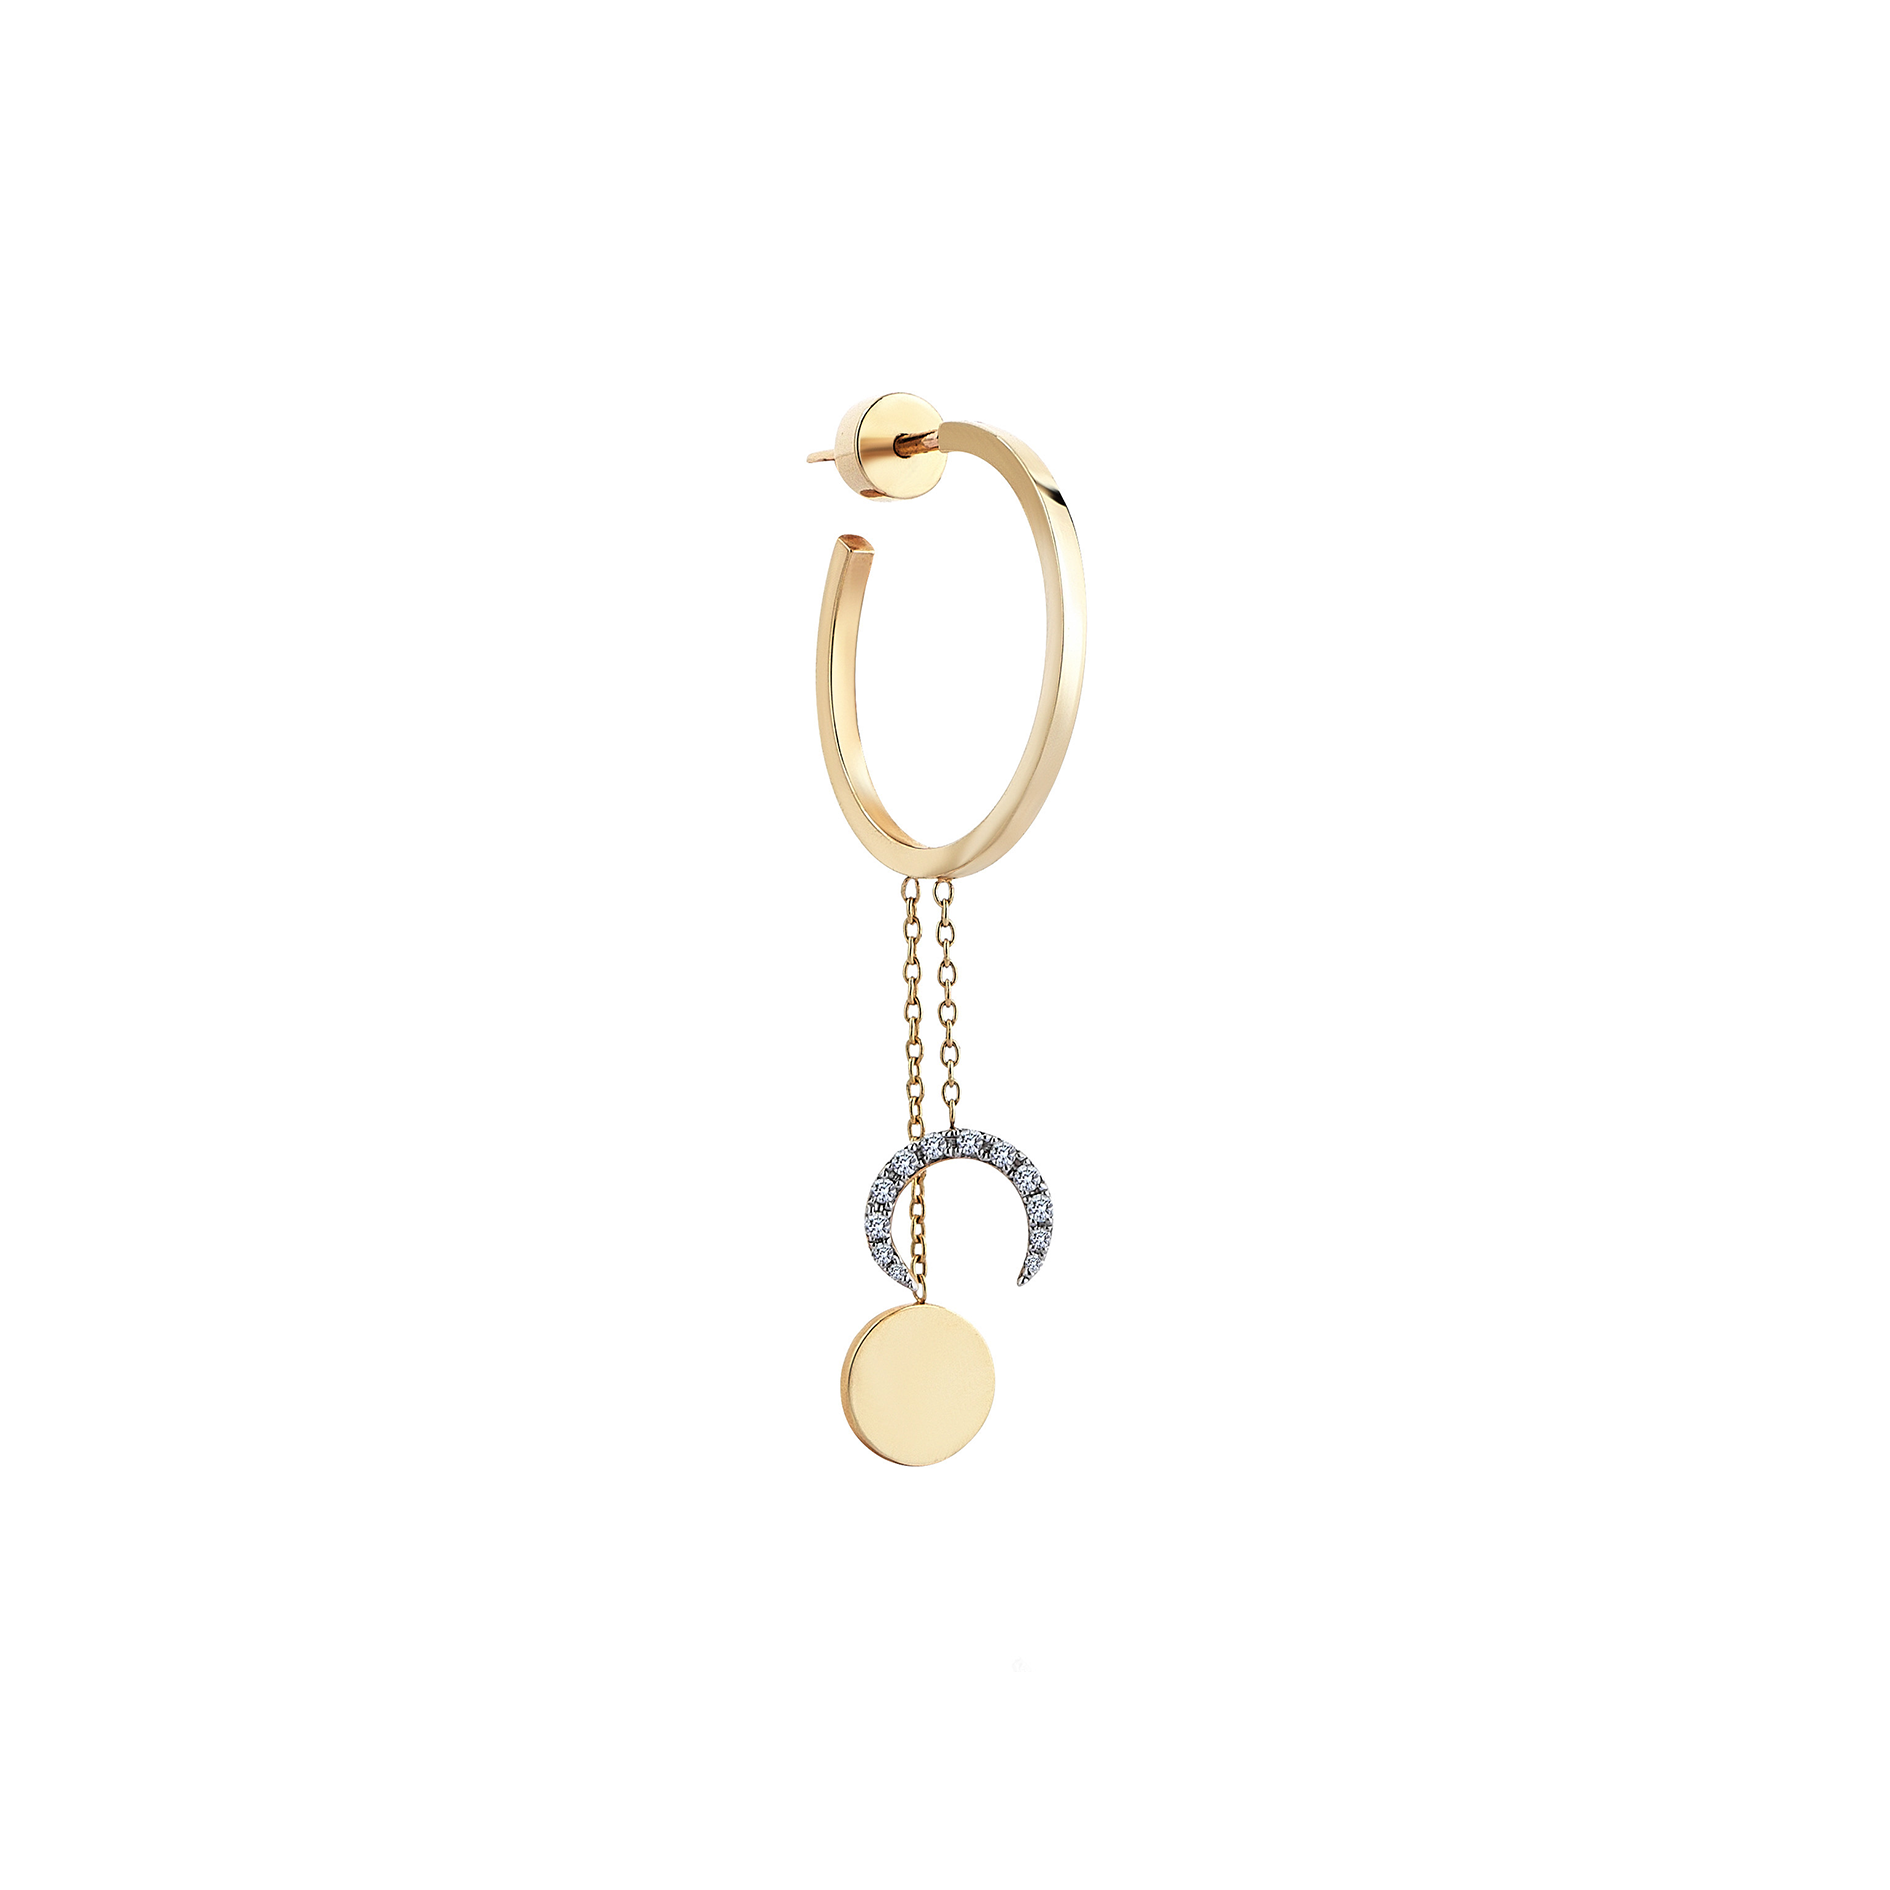 Double Selena Hoop Earring in Yellow Gold - Her Story Shop